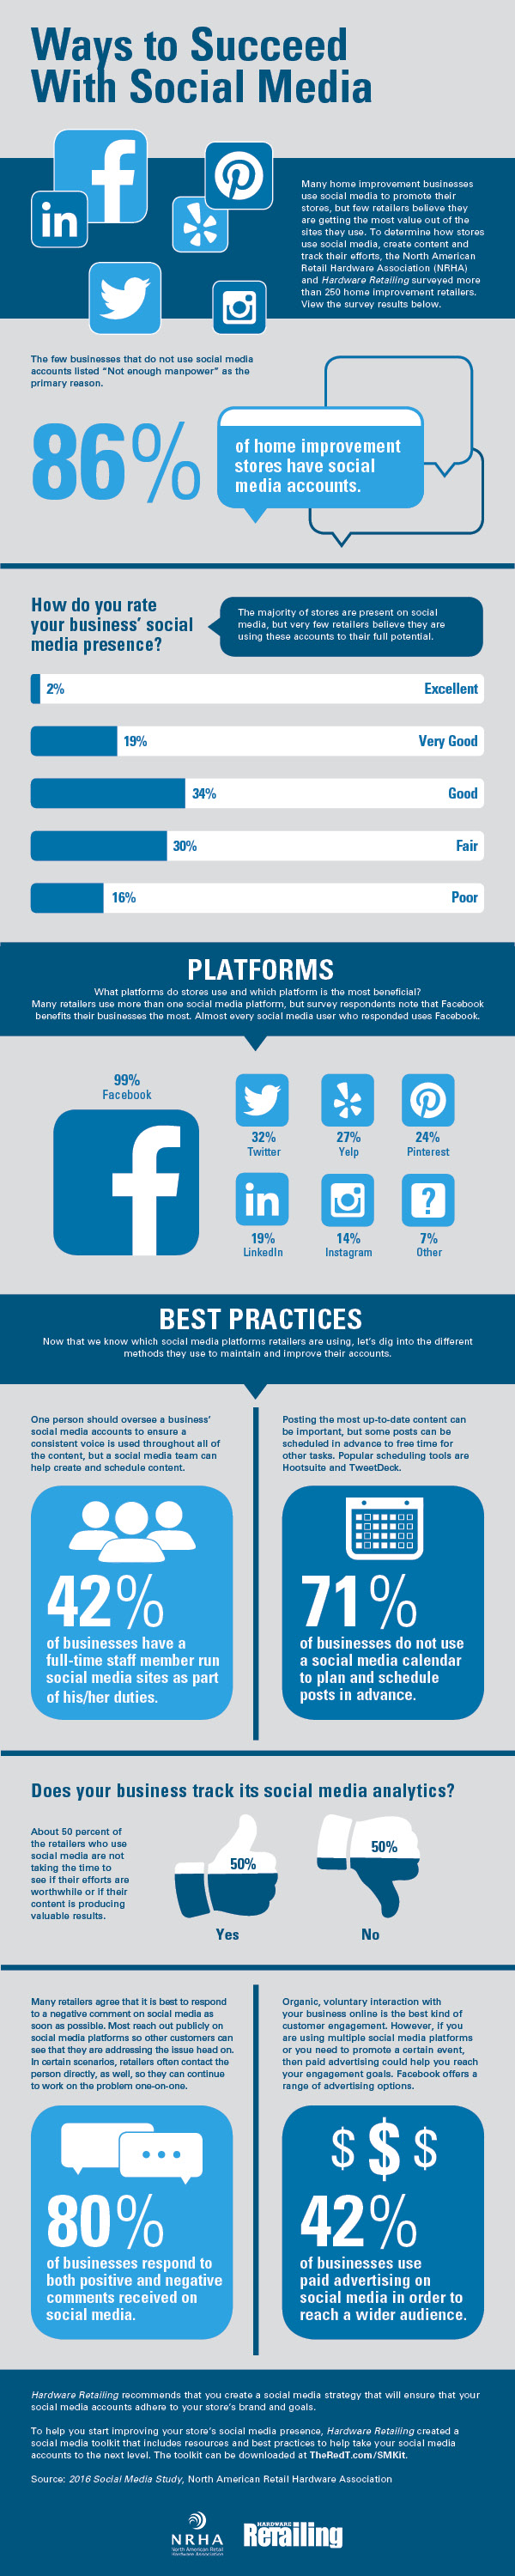 Ways to Succeed With Social Media (Infographic) | Hardware Retailing